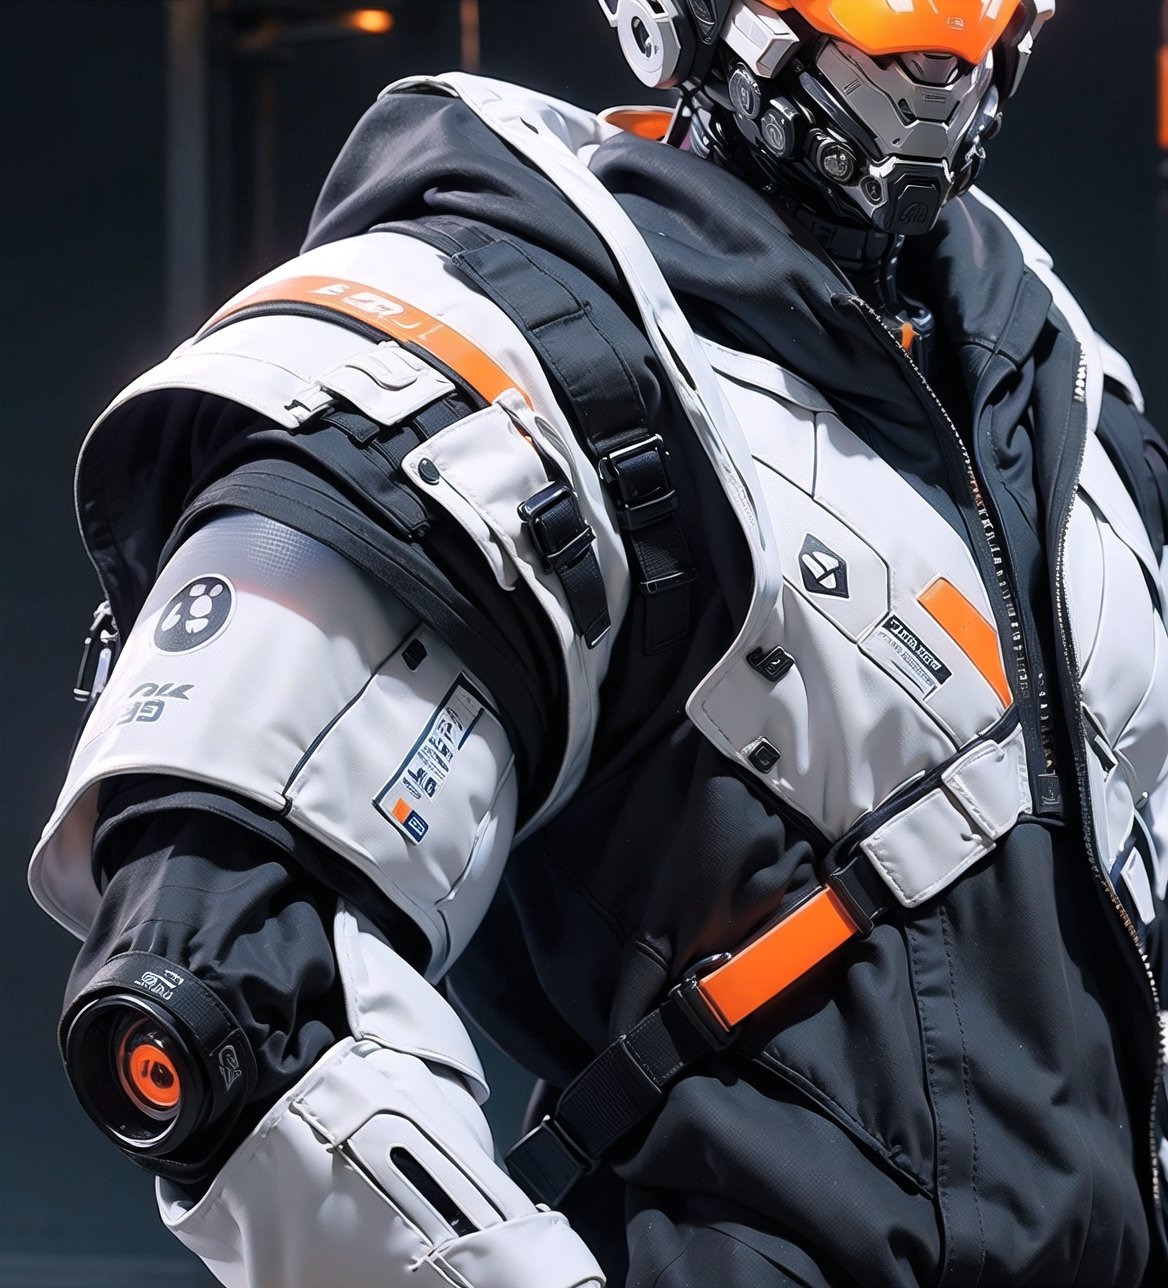 (ultra detailed beautiful eyes and detailed face:1.4), (untra detail face:1.4), (((8k, masterpiece side light, masterpiece, best quality, detailed, high resolution illustration))), ((1 male warrior)), ((orange and white army suit:1.38)), protection gear, battlefield, armor, extra large helmet, metallic suit gare, beautiful big eyes, green neon light eyes, dark background, blur background, holding mechine gun, walking,((front_view)),  ((extra big head:1.36)), ((extra short body:1.36)), many neon light from gear join, red neon light, blur background, heavy fog environment, dynamic light on body, ((front view)), closeup shots,  urban techwear,C7b3rp0nkStyle,1 man ,Papi Kocic, real face, masculine, macho